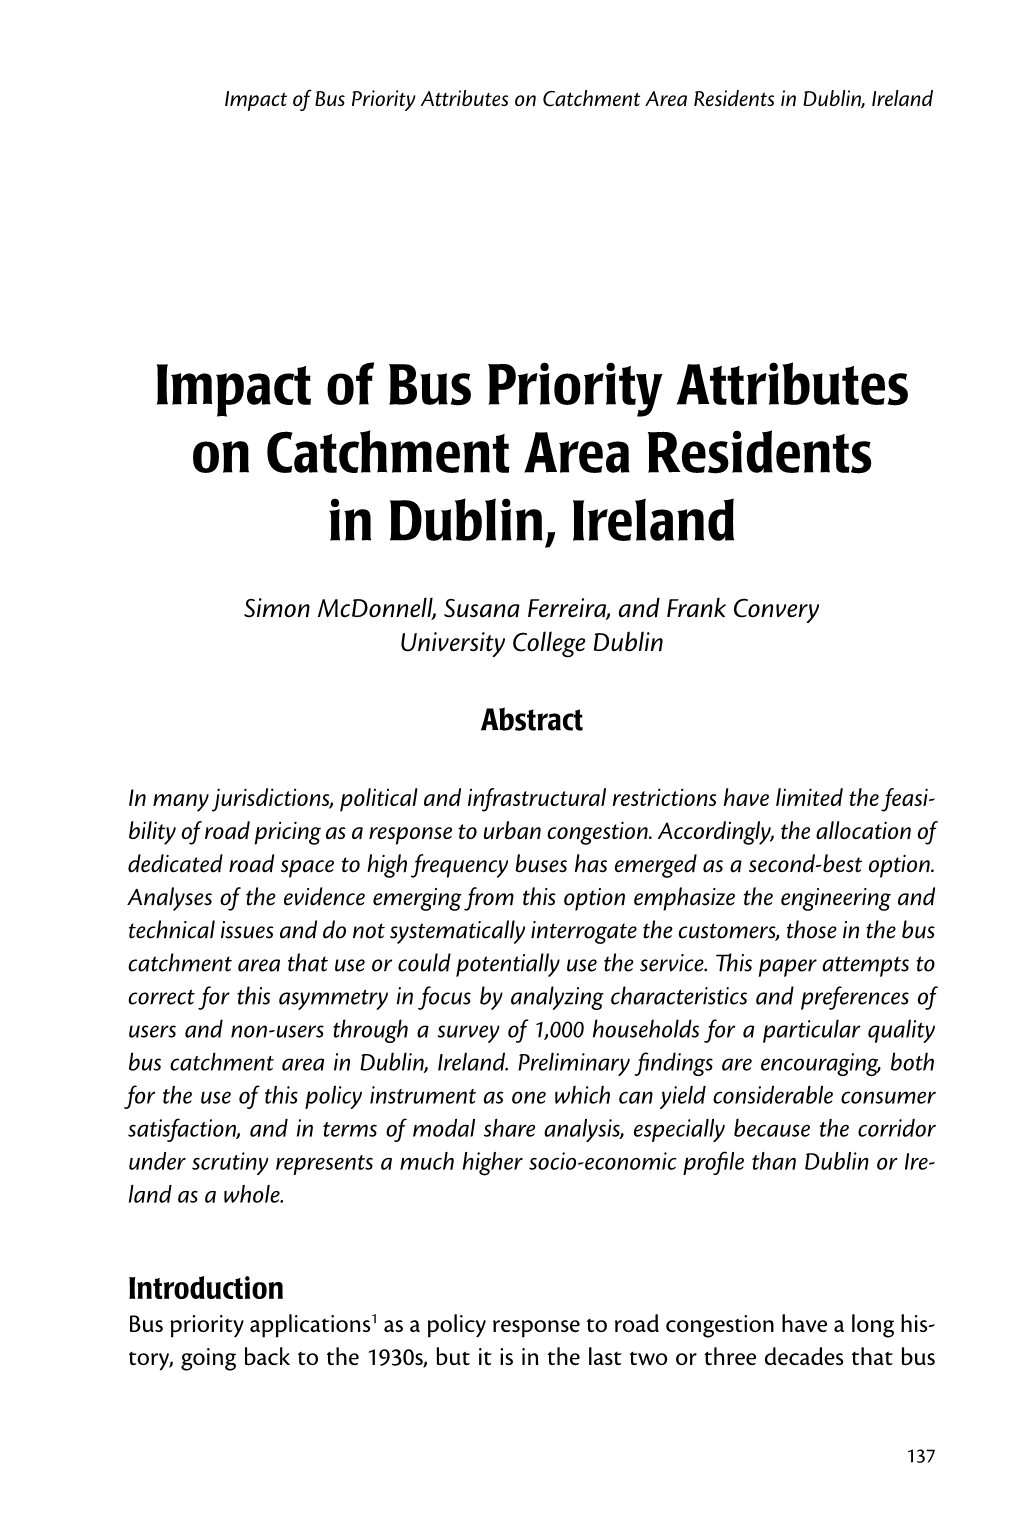 Impact of Bus Priority Attributes on Catchment Area Residents in Dublin, Ireland